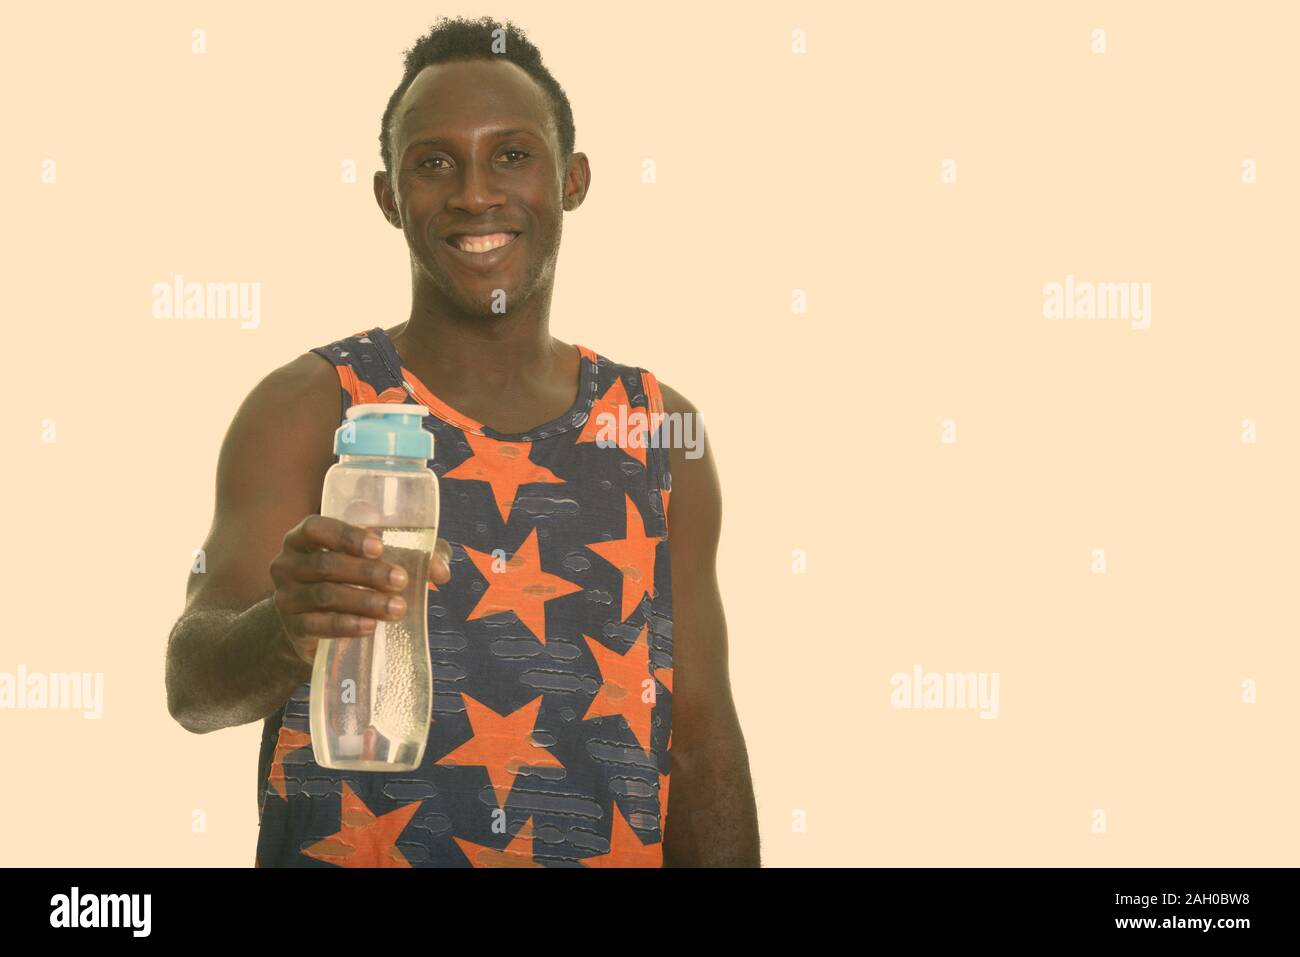 https://c8.alamy.com/comp/2AH0BW8/young-happy-black-african-man-smiling-and-giving-water-bottle-2AH0BW8.jpg